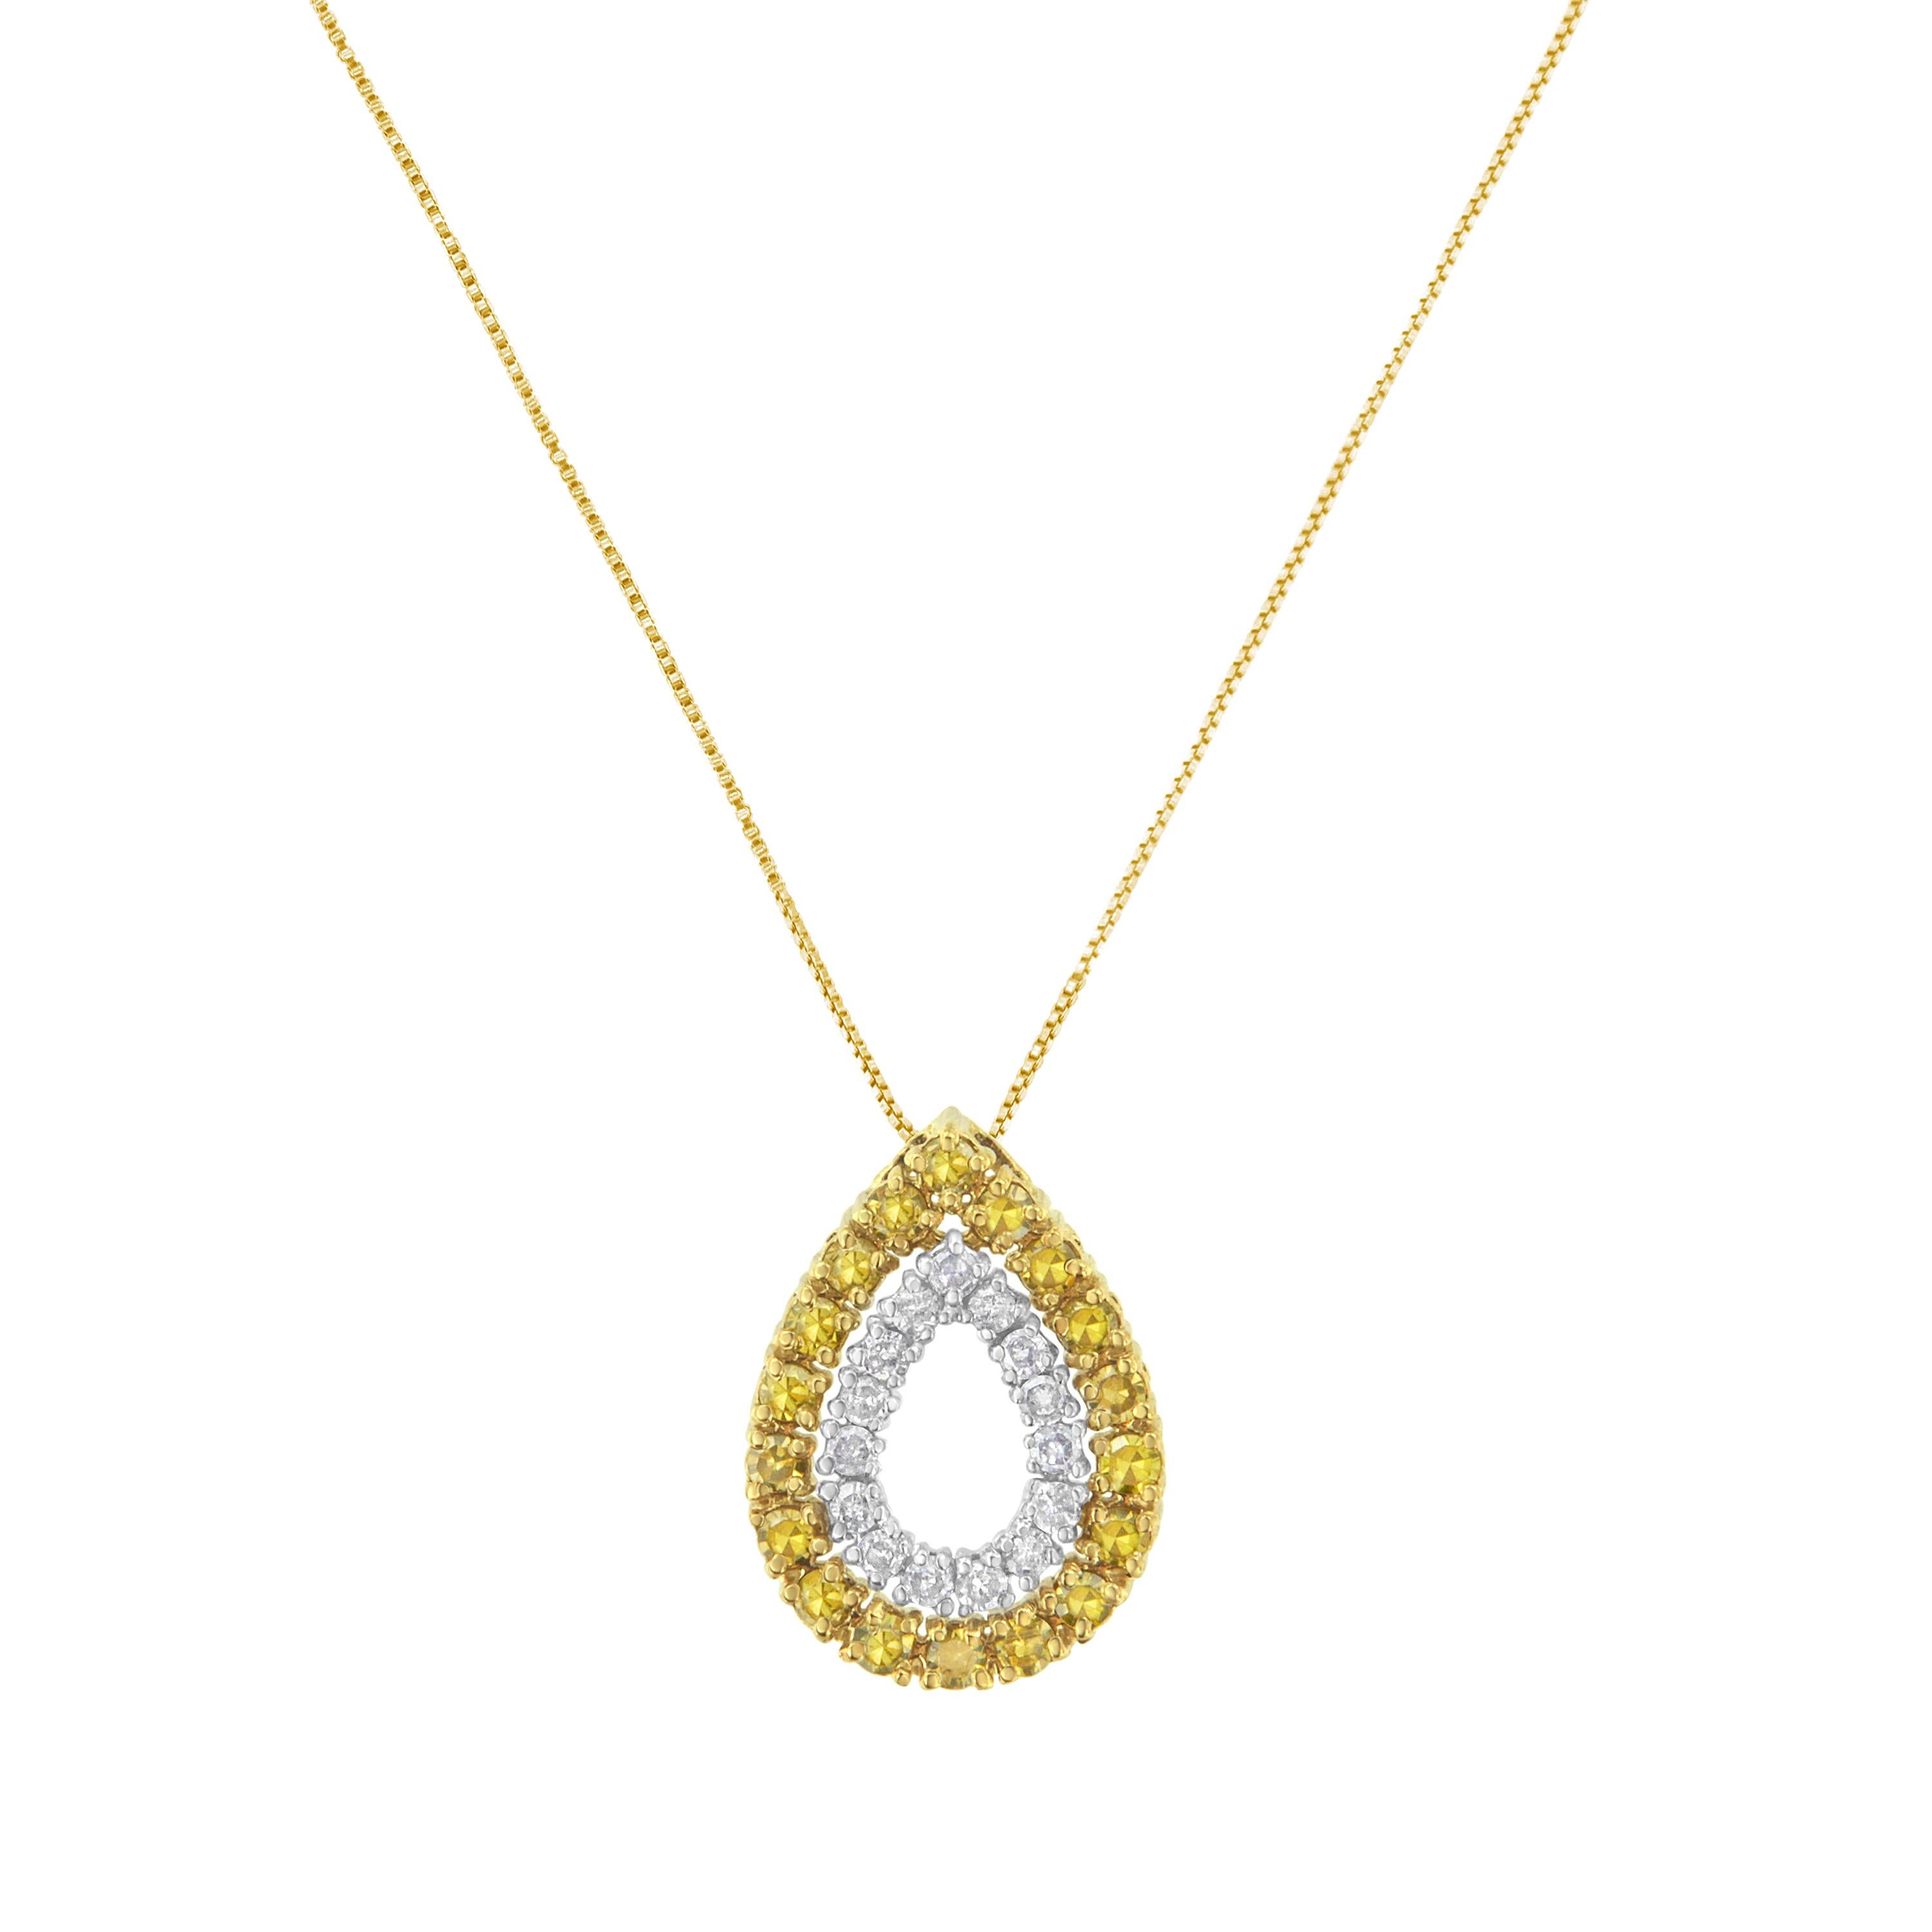 Delicate and lovely, this 14k yellow gold plated sterling silver necklace is perfect for any occasion. A hollow pear shape pendant studded with 1/2ct TDW of round cut diamonds hangs from a rope chain. A smaller pear shape inlaid in white diamonds is